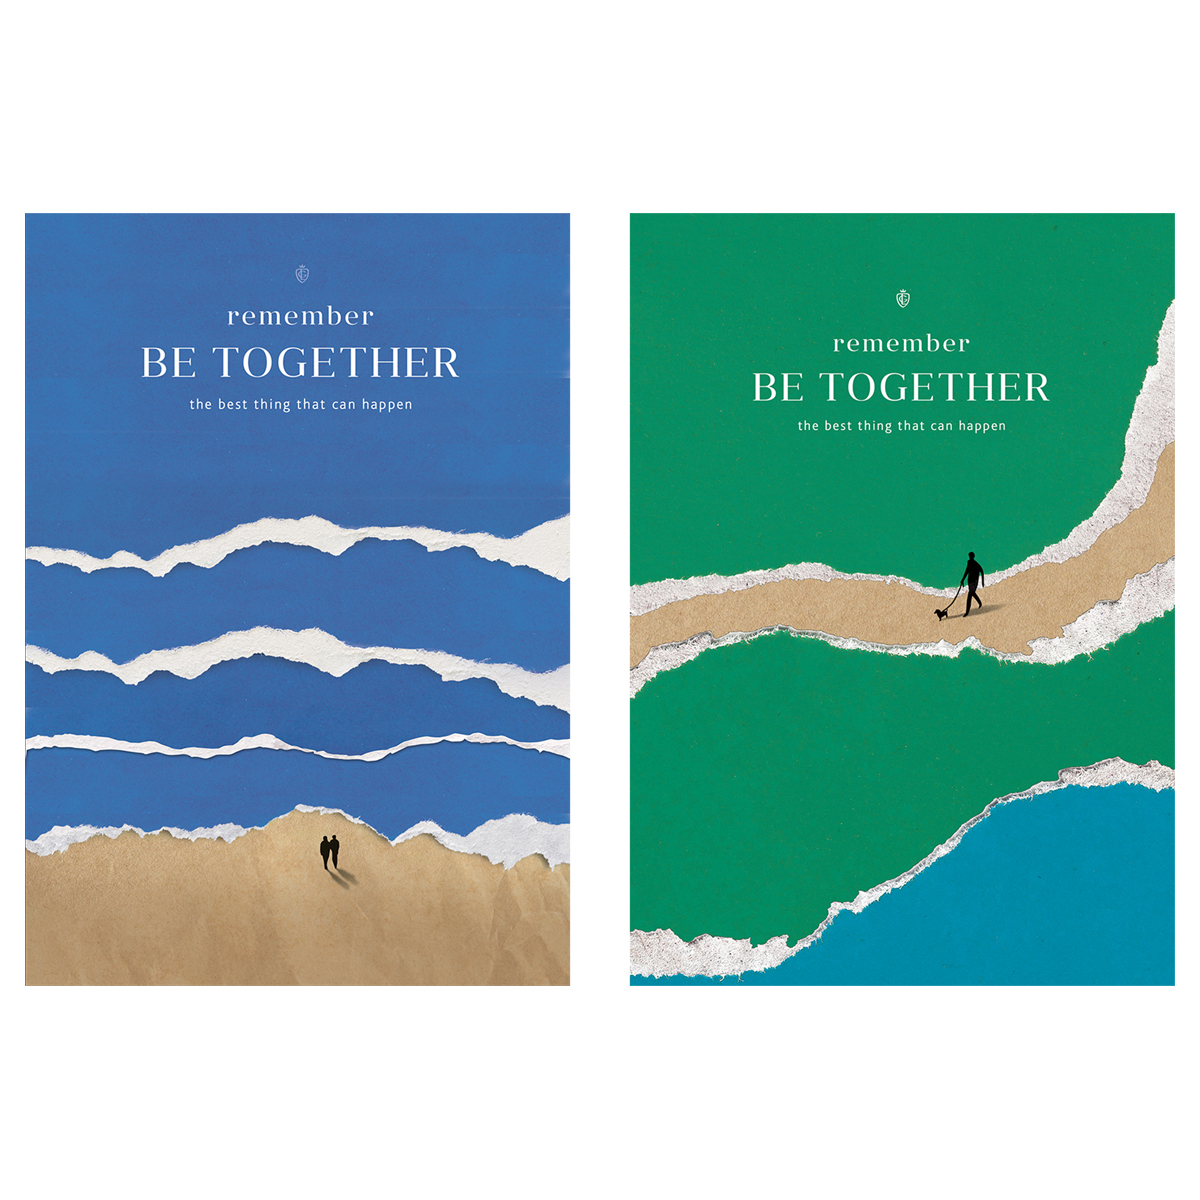  48., 5,  Greenwich Line "Be together",  ,  -,  